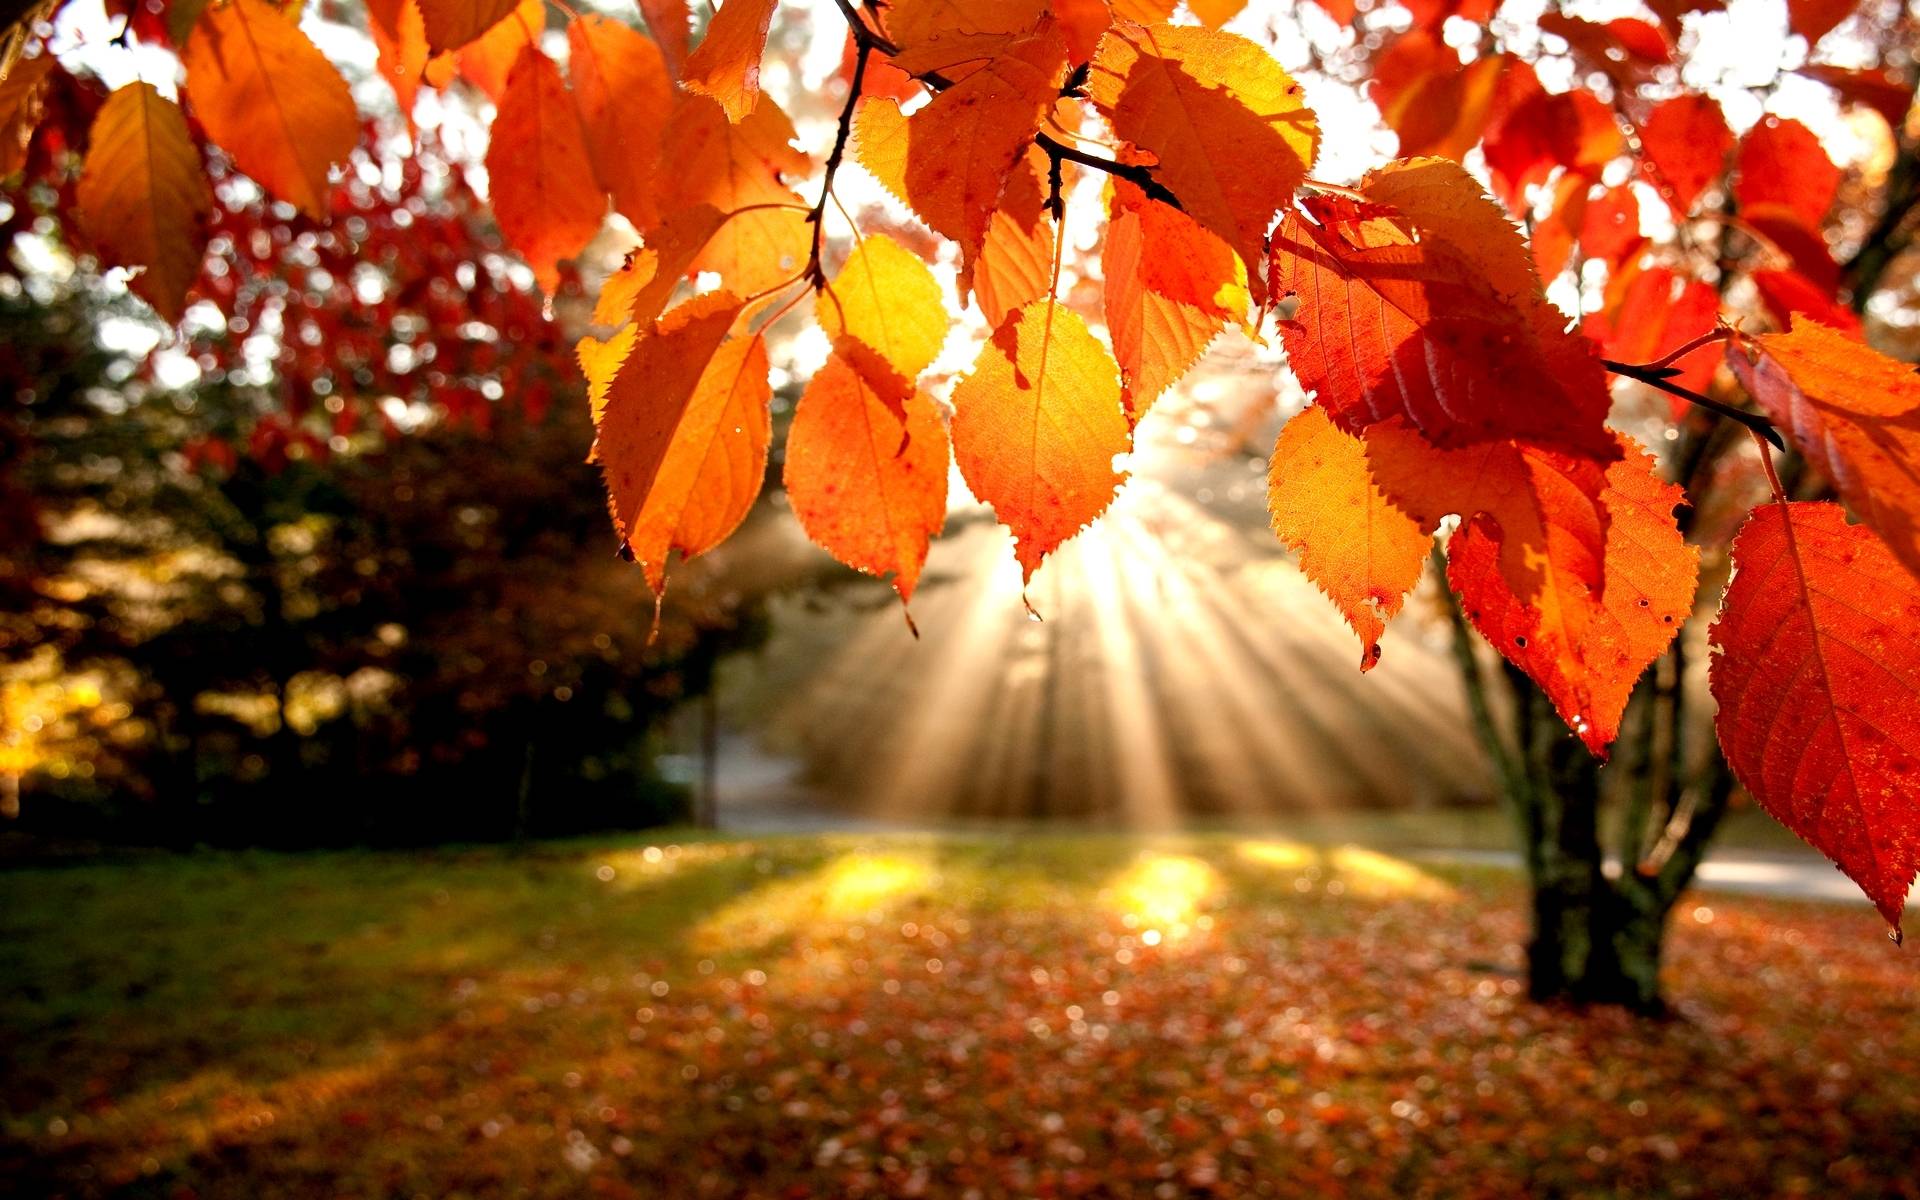 Awesome fall wallpaper findorgetcom, Background